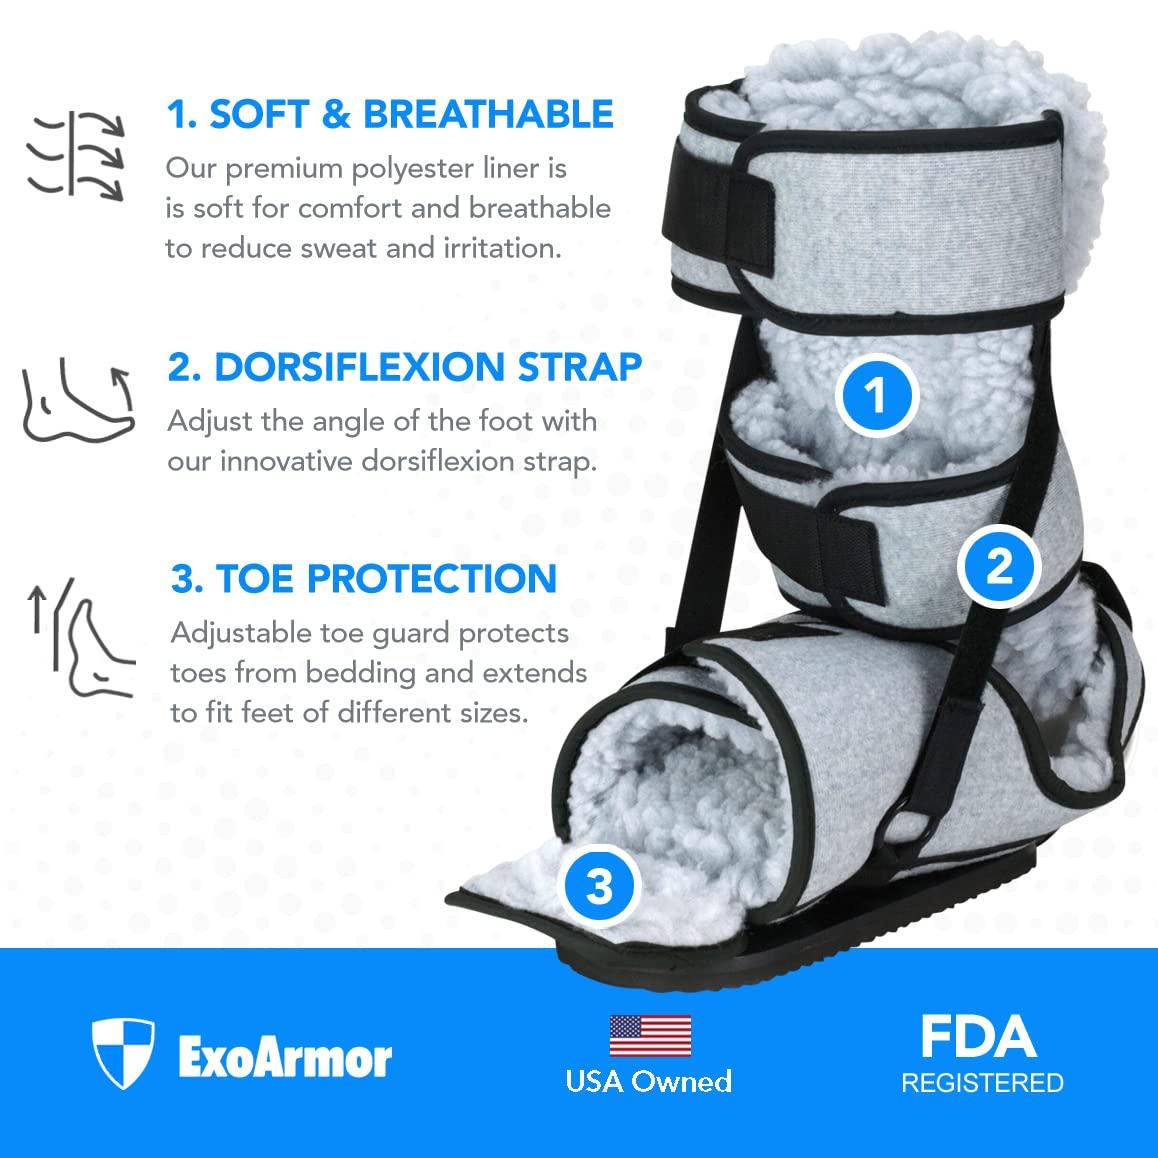 ExoArmor Podus Boot Multi Function - For Heel Pressure Foot Drop and Hip  Rotation. Soft & Breathable Polyester Fleece Liner. (Universal Size)